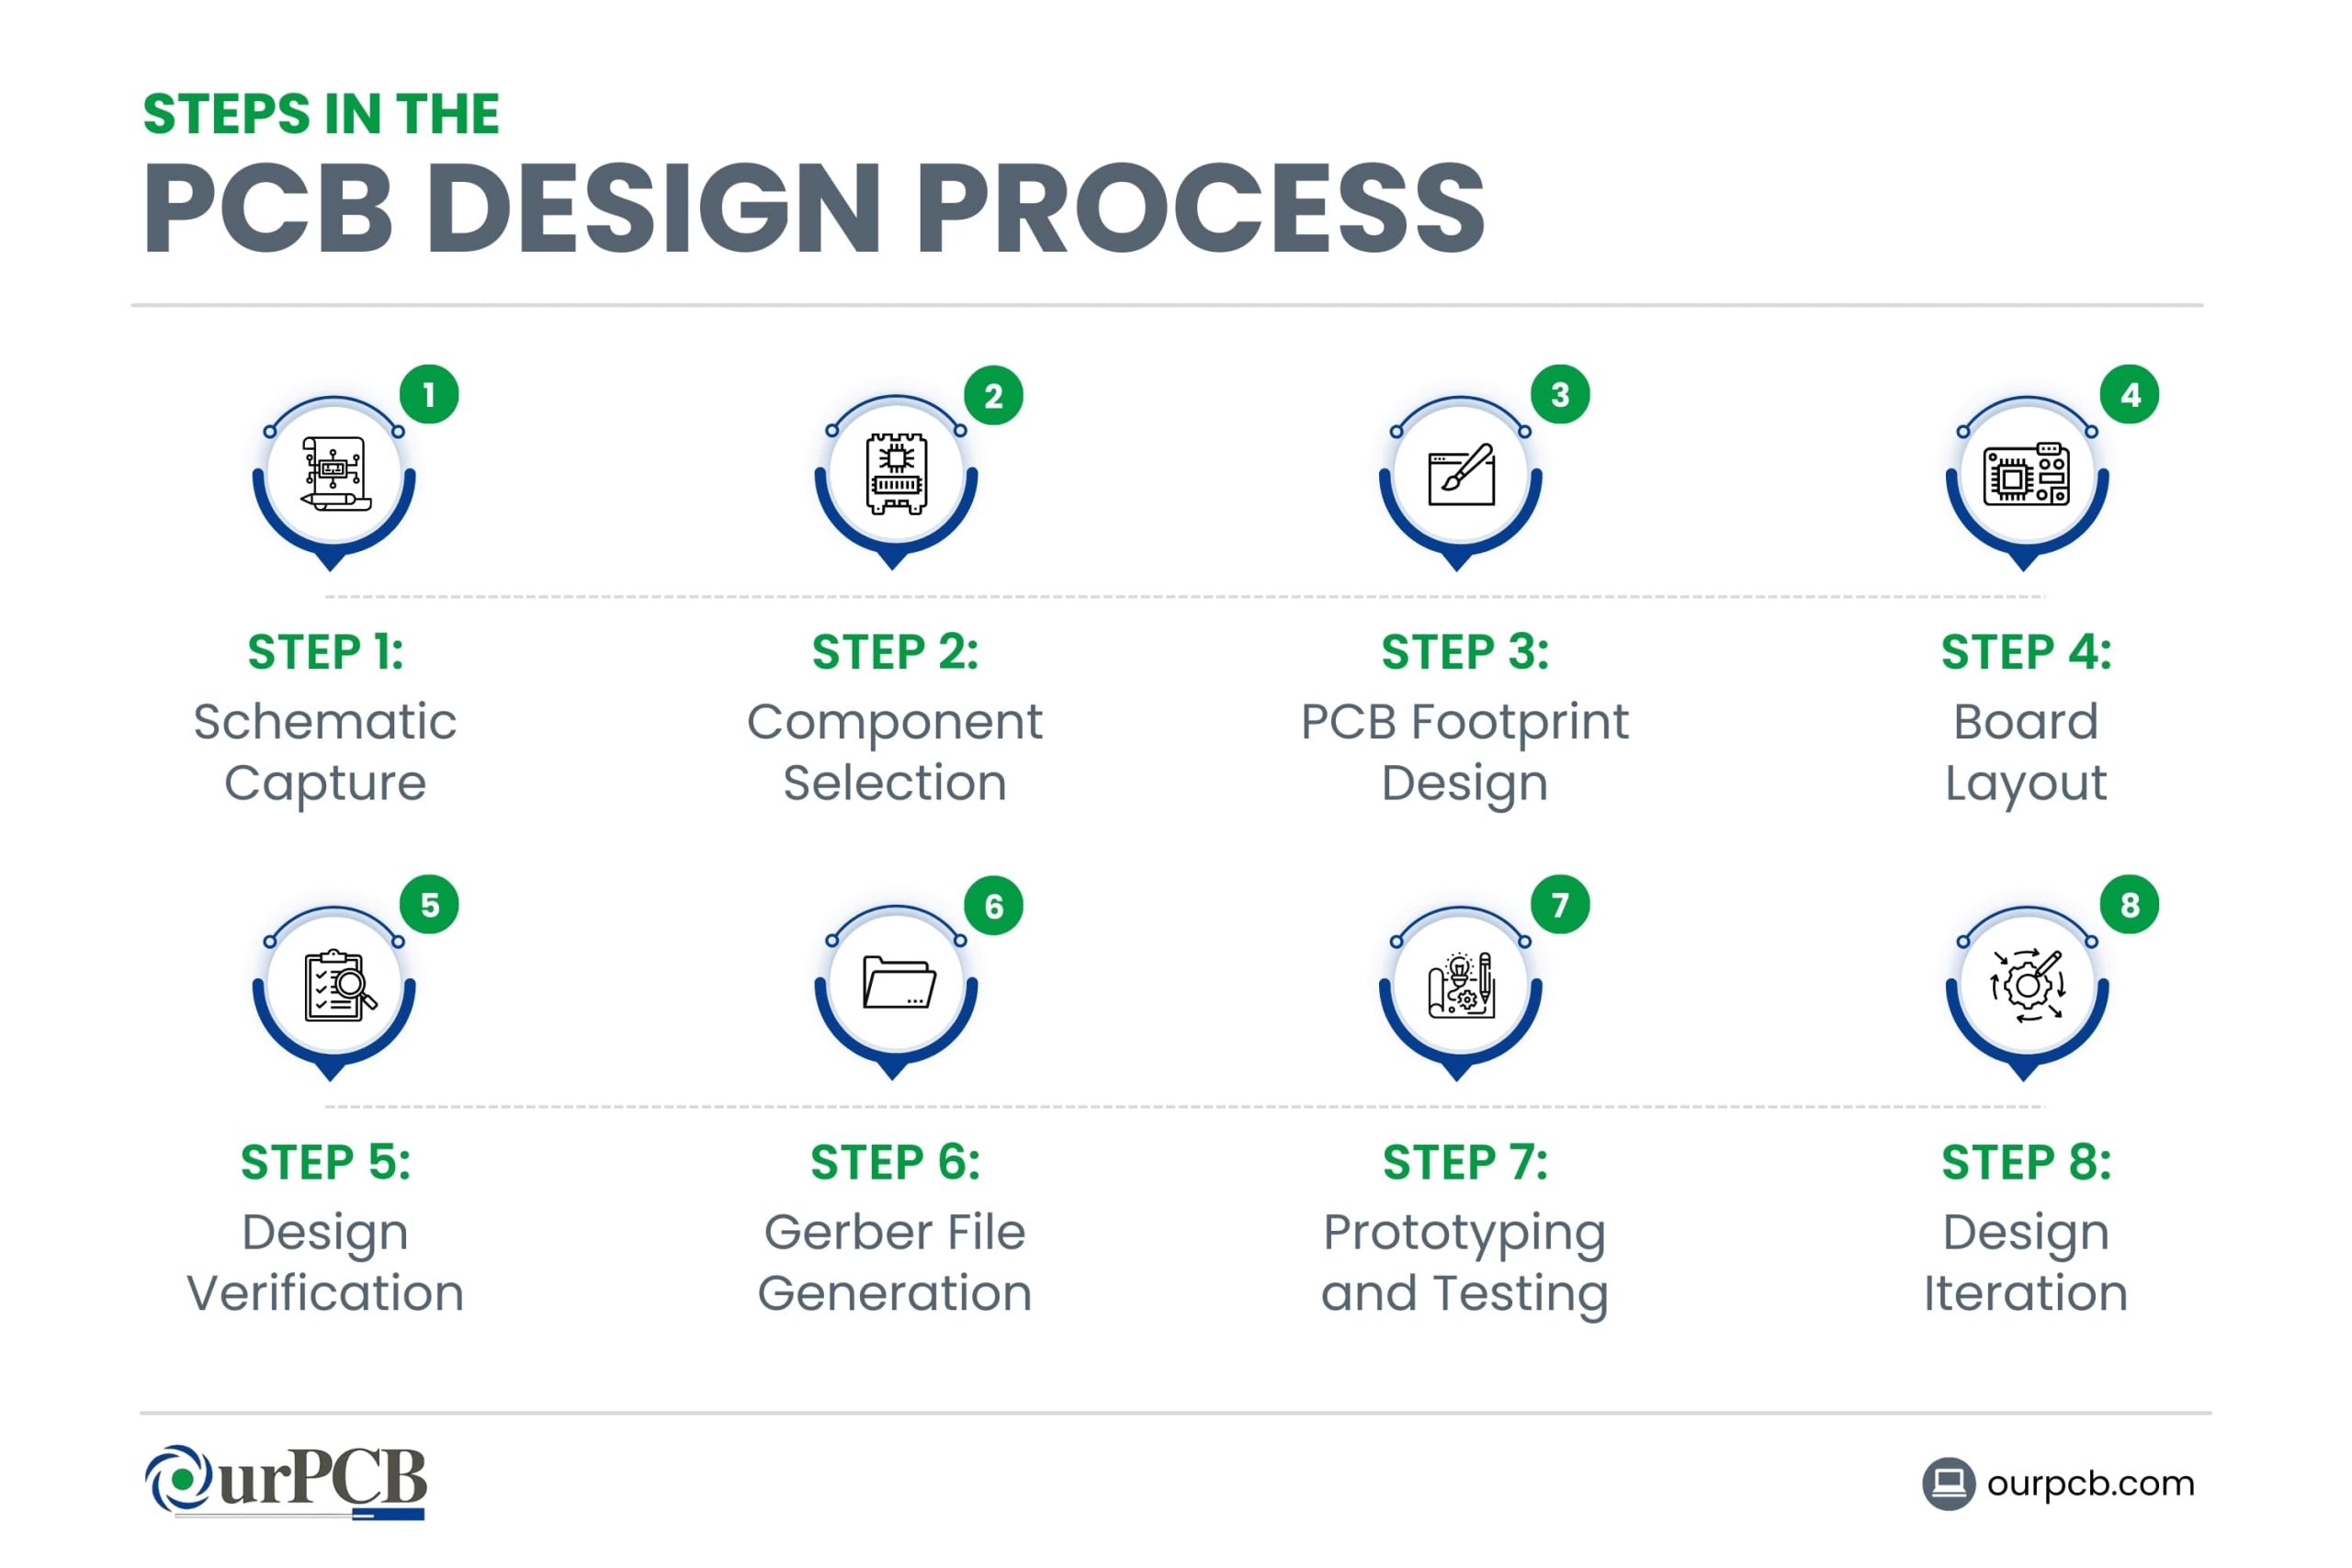 Steps in the PCB Design Process